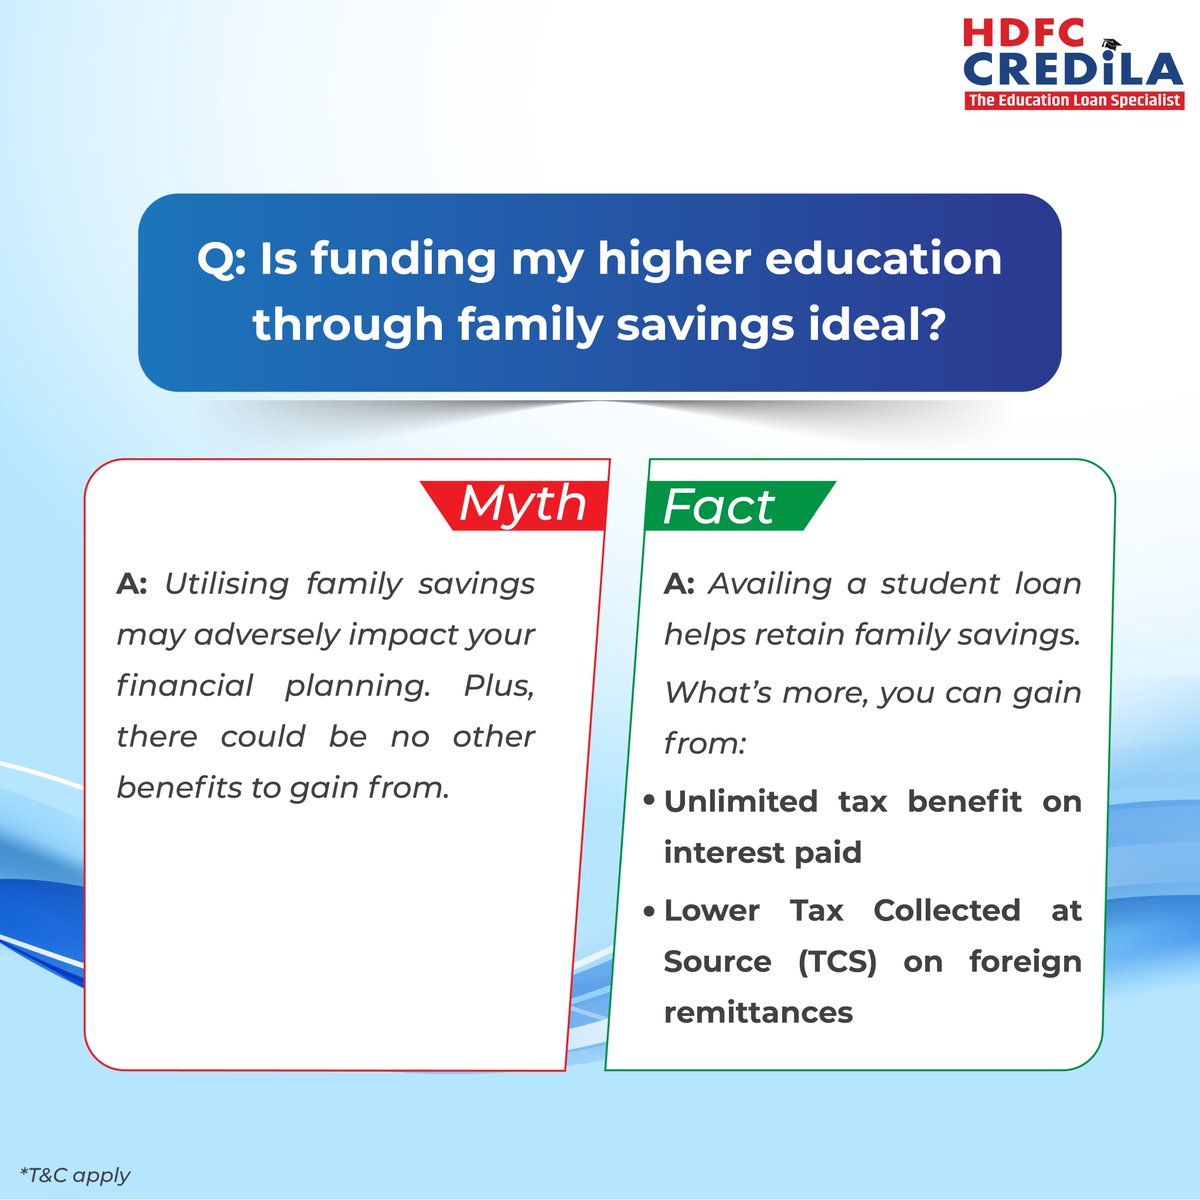 Save big even as you pursue your dream education, whether in India or overseas! Visit us at bit.ly/441okH5 to apply now.
*T&C apply

#HDFCCredila #EducationLoan #StudentLoan #TaxBenefits #TCS #ApplyNow #EducationFinance #FinanceTips #FinancialServices #HigherEducation…